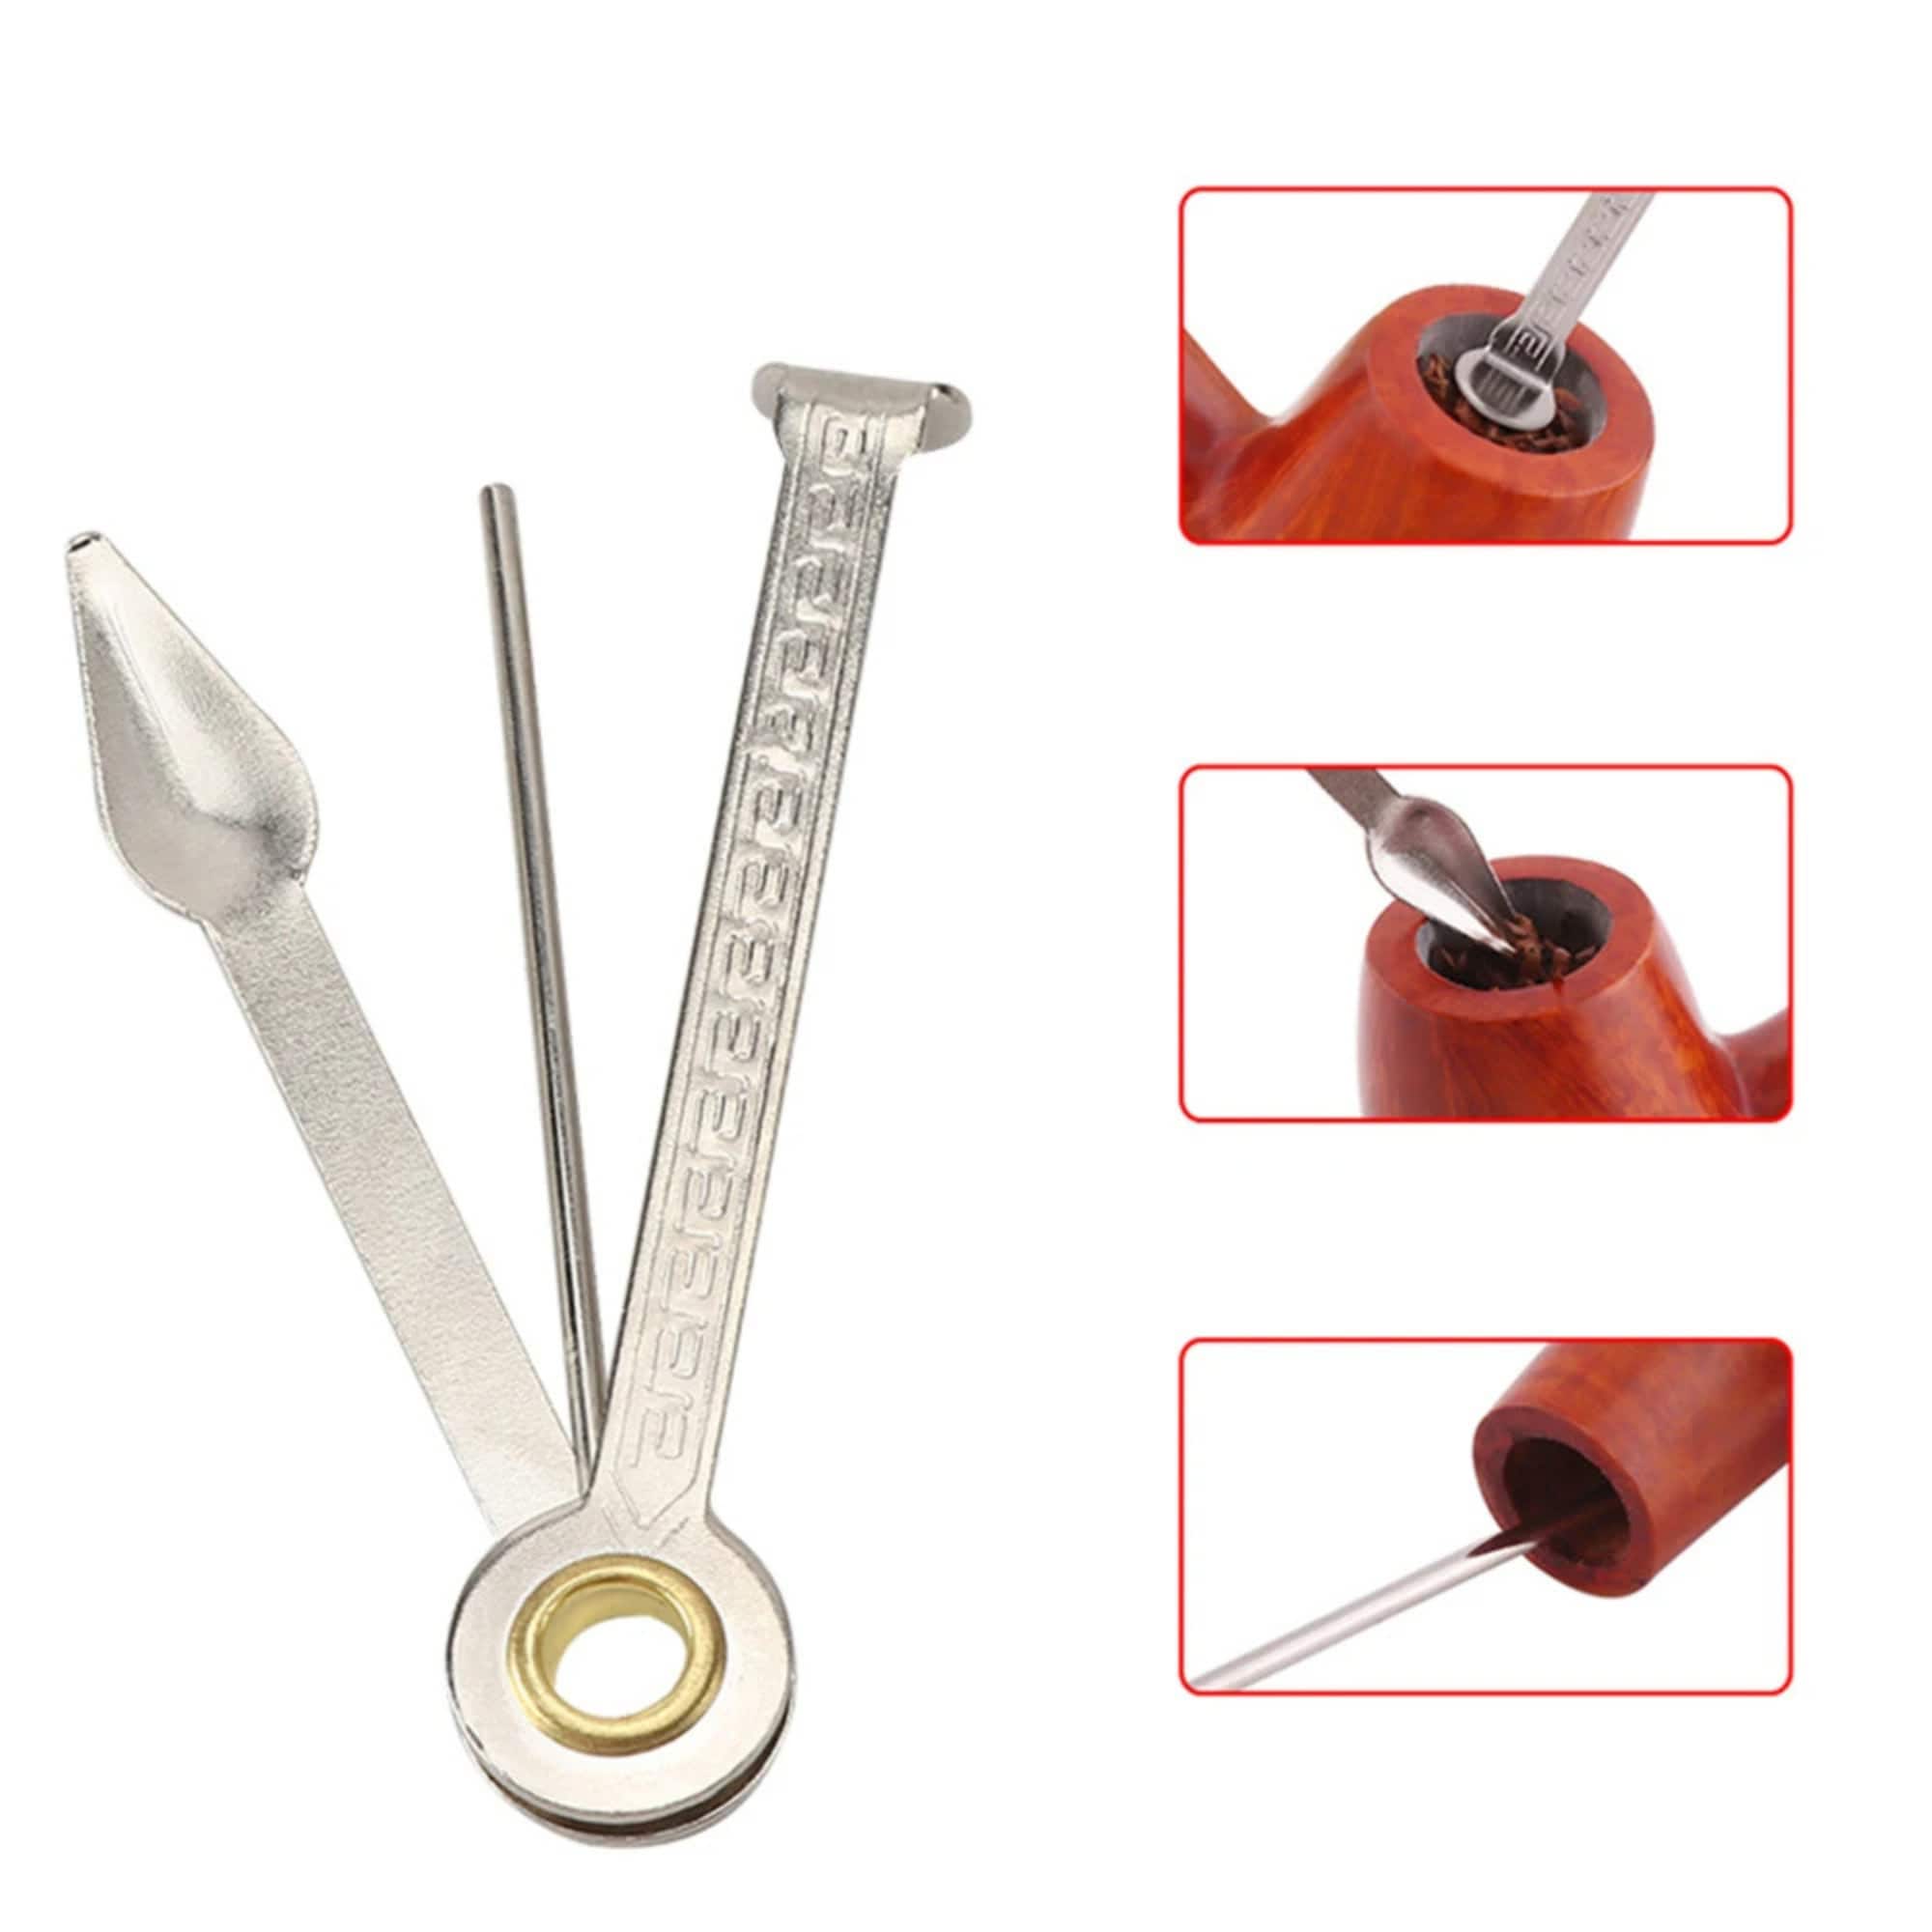  3 In 1 Stainless Steel And Rosewood Tobacco/Smoking Pipe  Scraper Nozzle Cleaner Tamper Tool Set